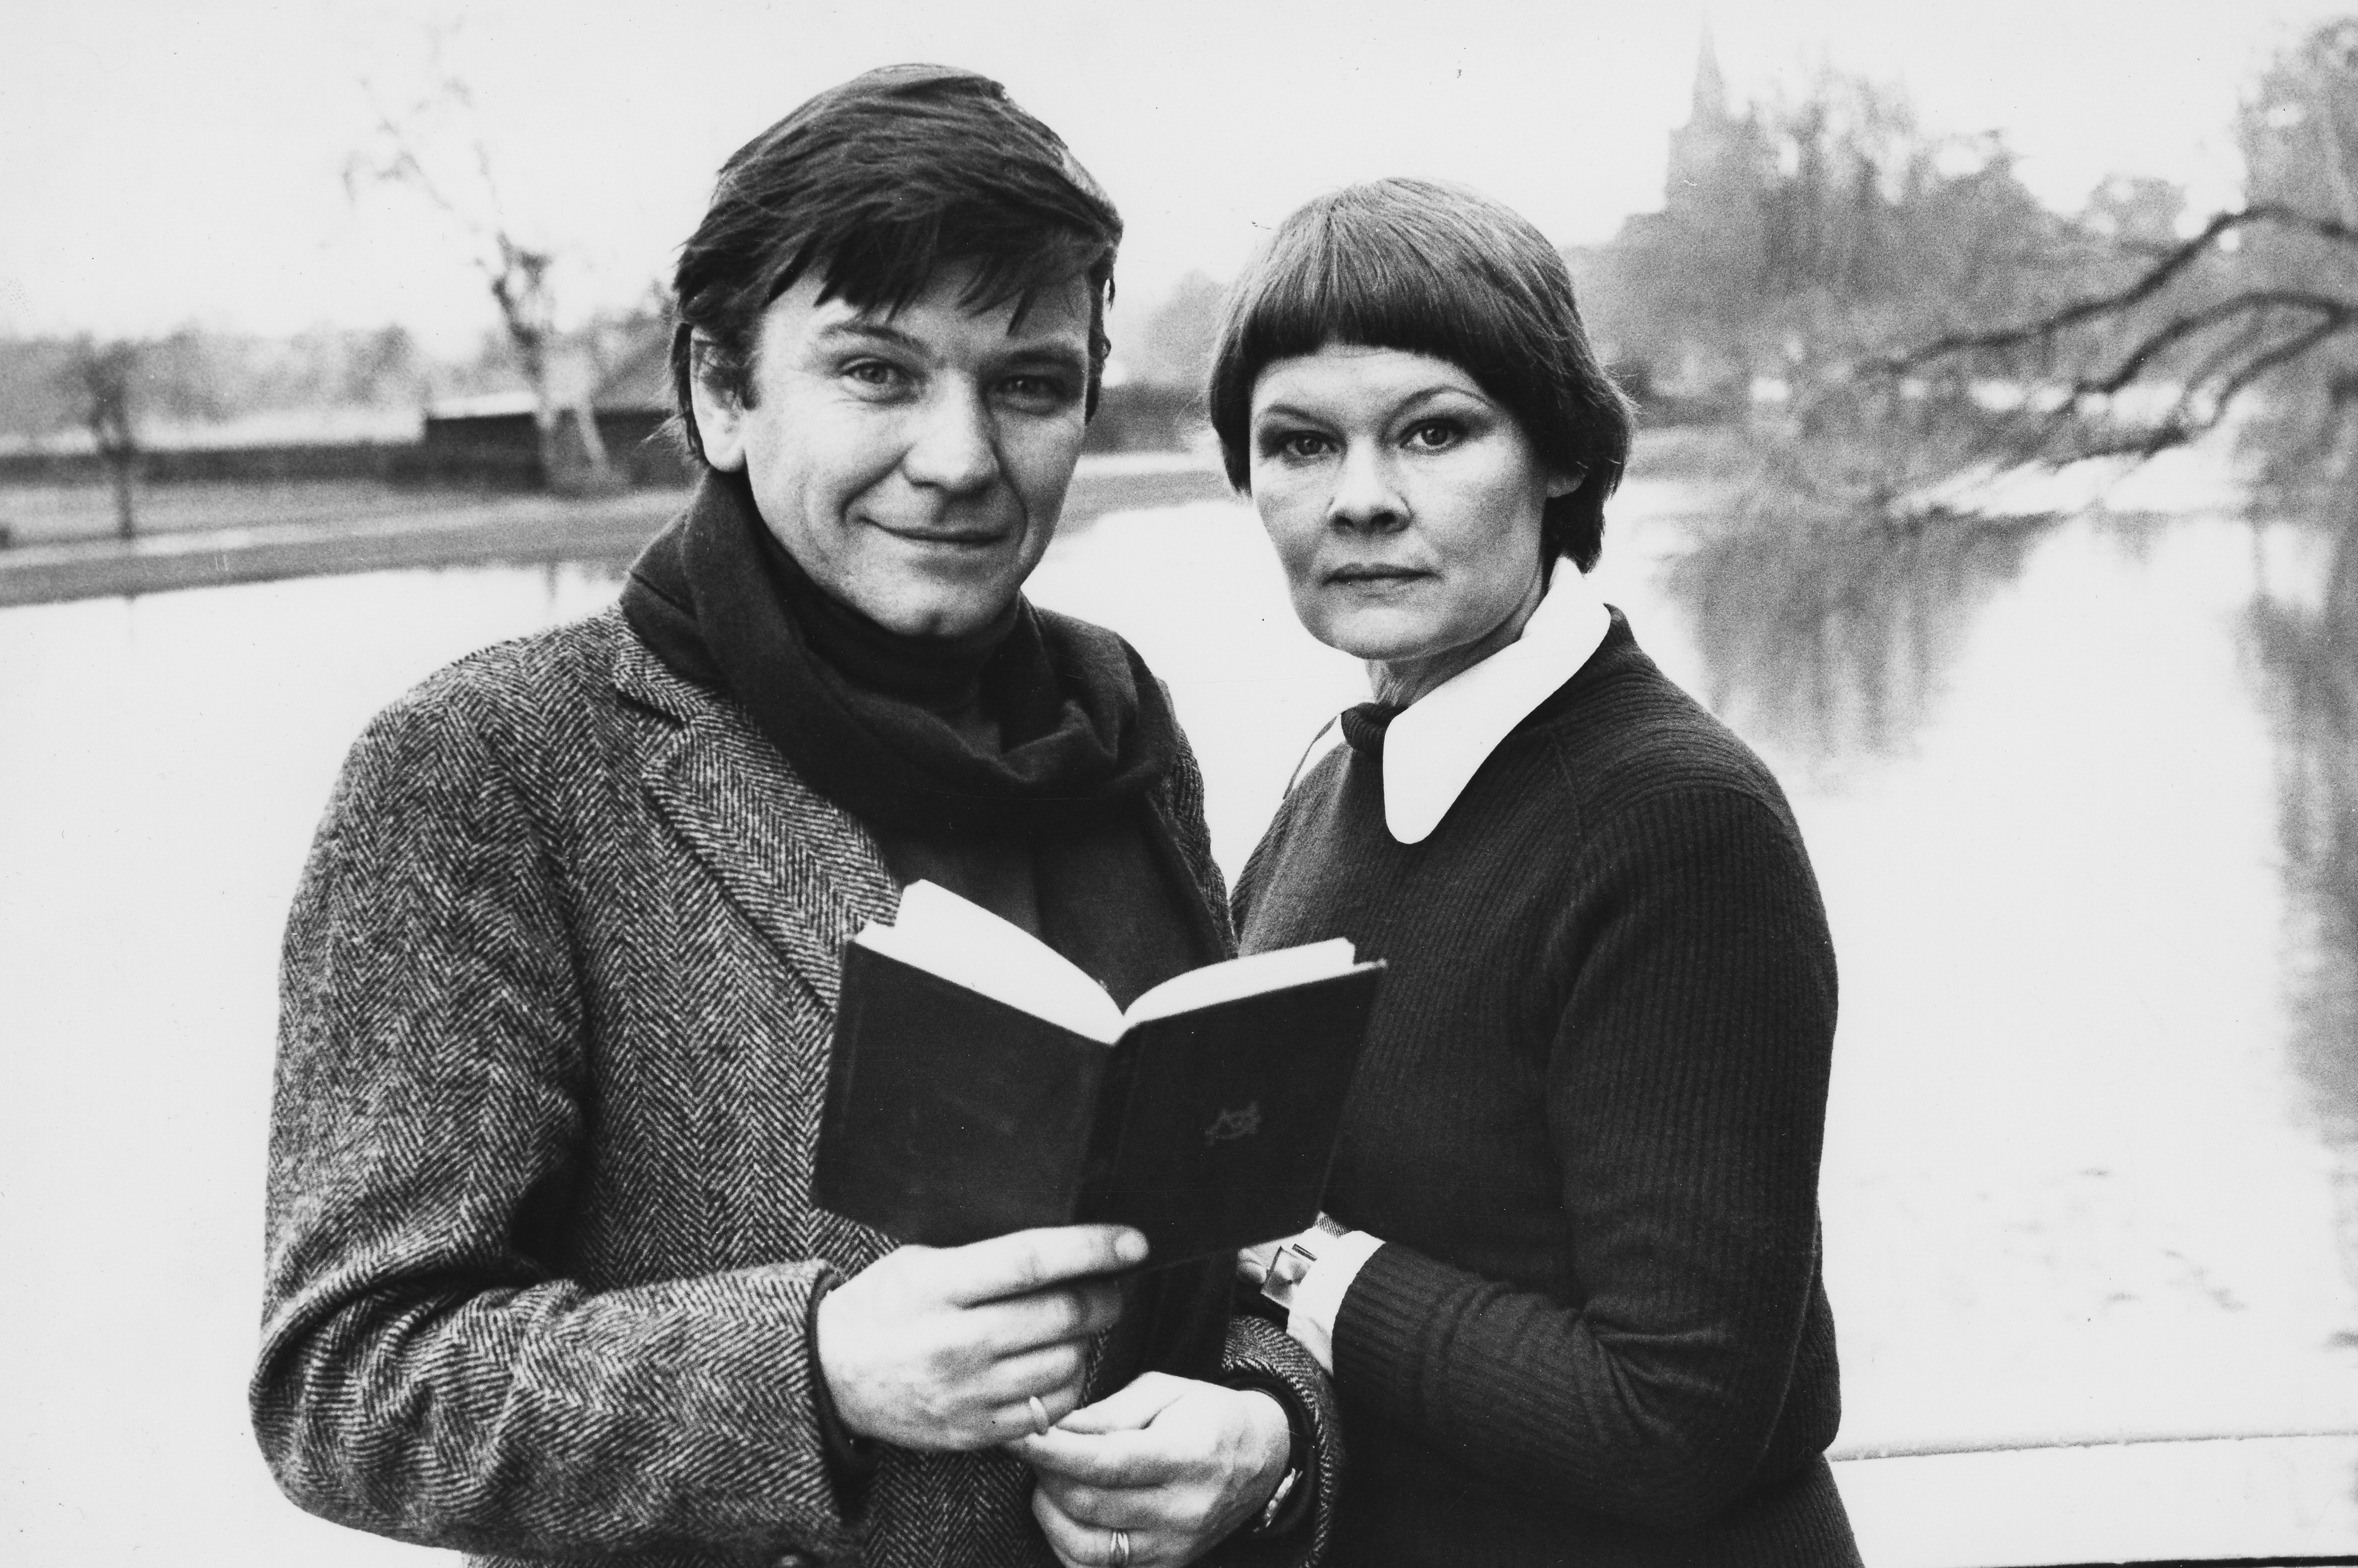 Michael Williams and Judi Dench pose standing next to a river on January 27, 1977 ┃Source: Getty Images